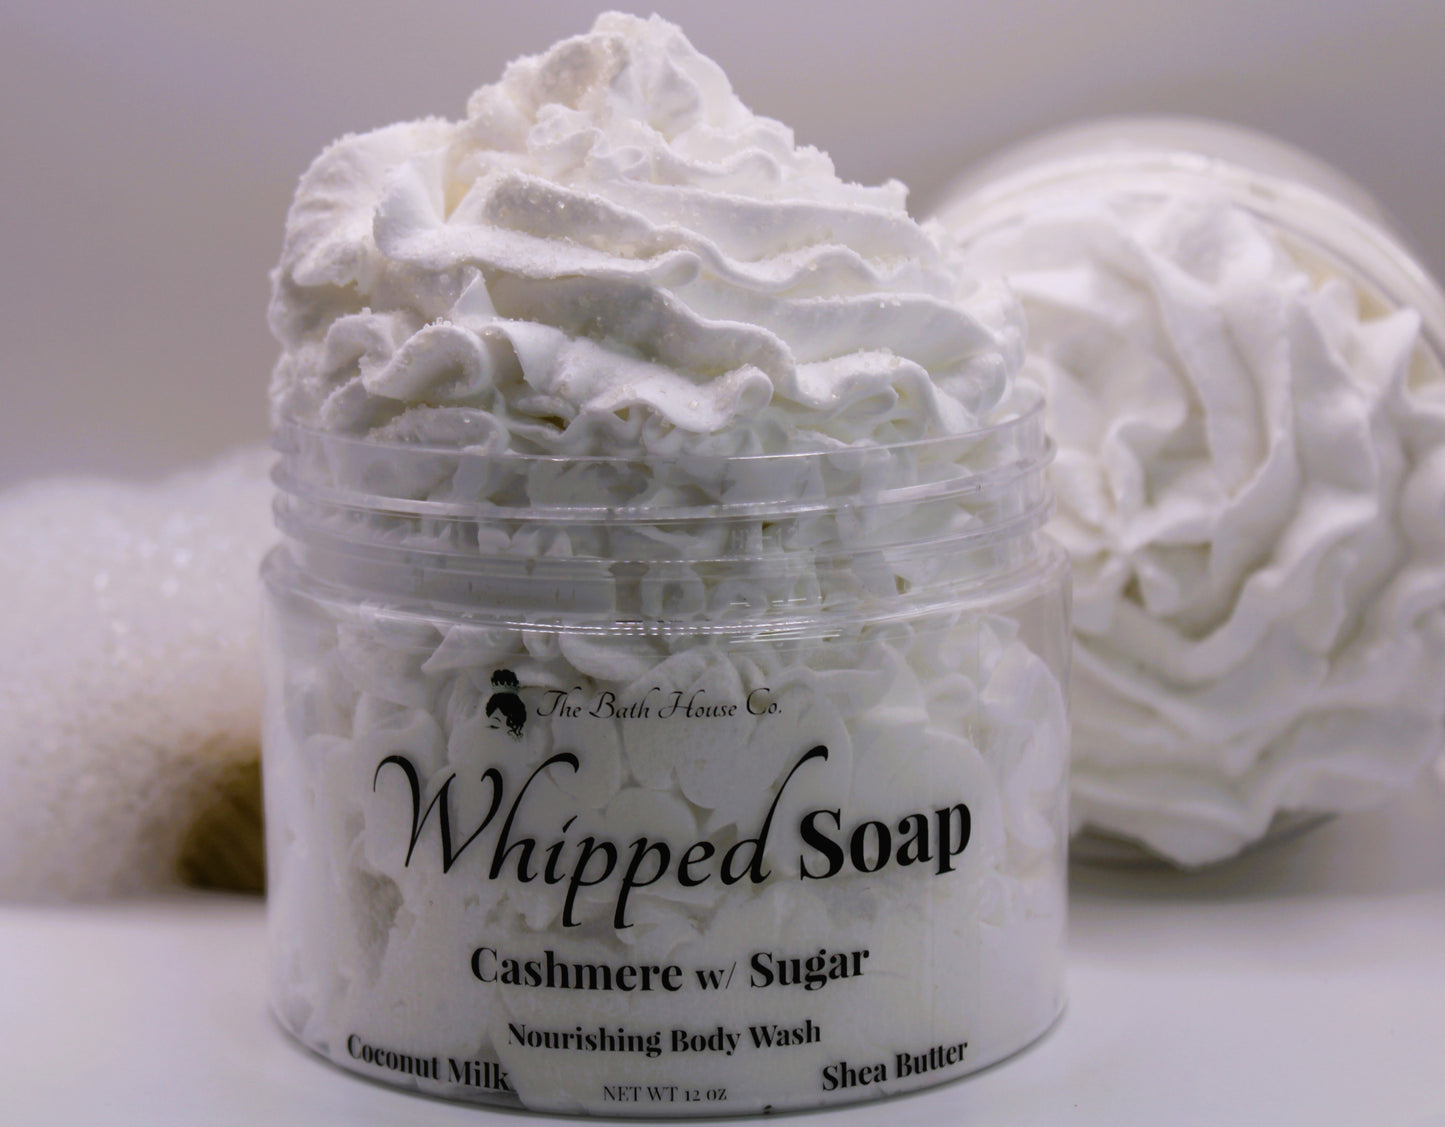 Cashmere with Sugar Whipped Soap Body Wash